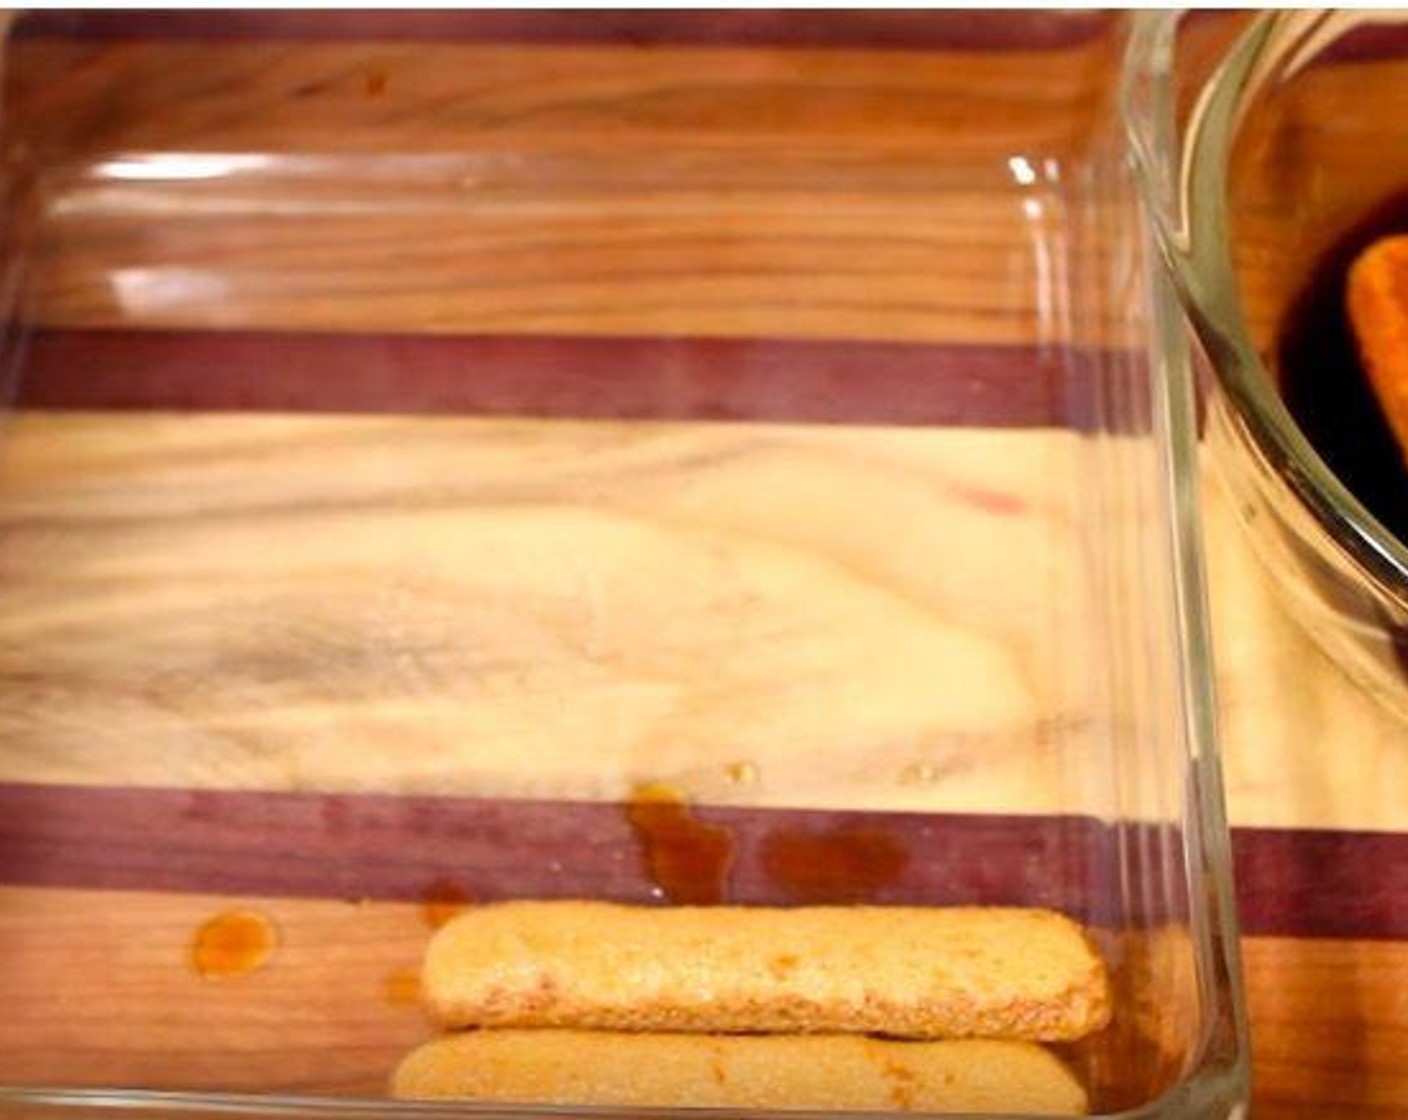 step 5 To assemble the tiramisu, dunk Ladyfingers (7 oz) into espresso mixture for 2-3 seconds and line the bottom of a 9"x9" baking dish with them.